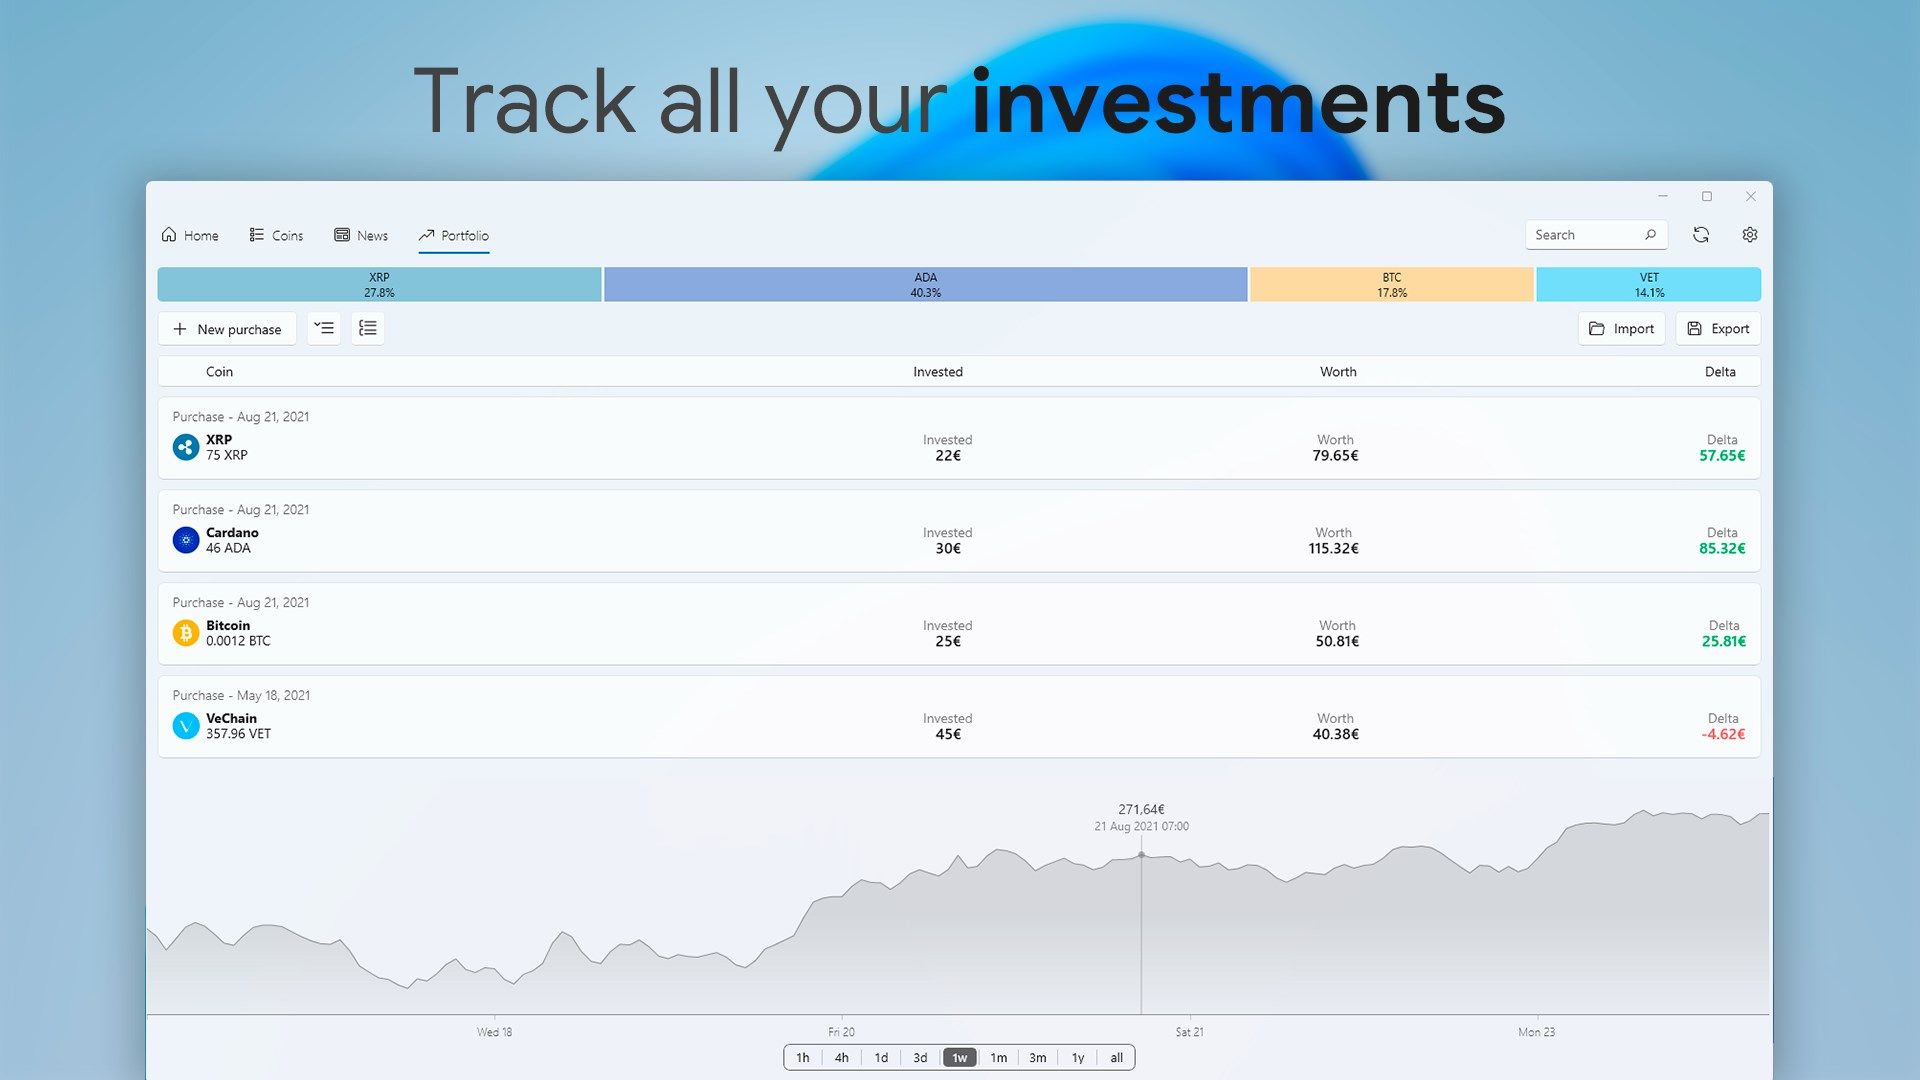 Track all your investments